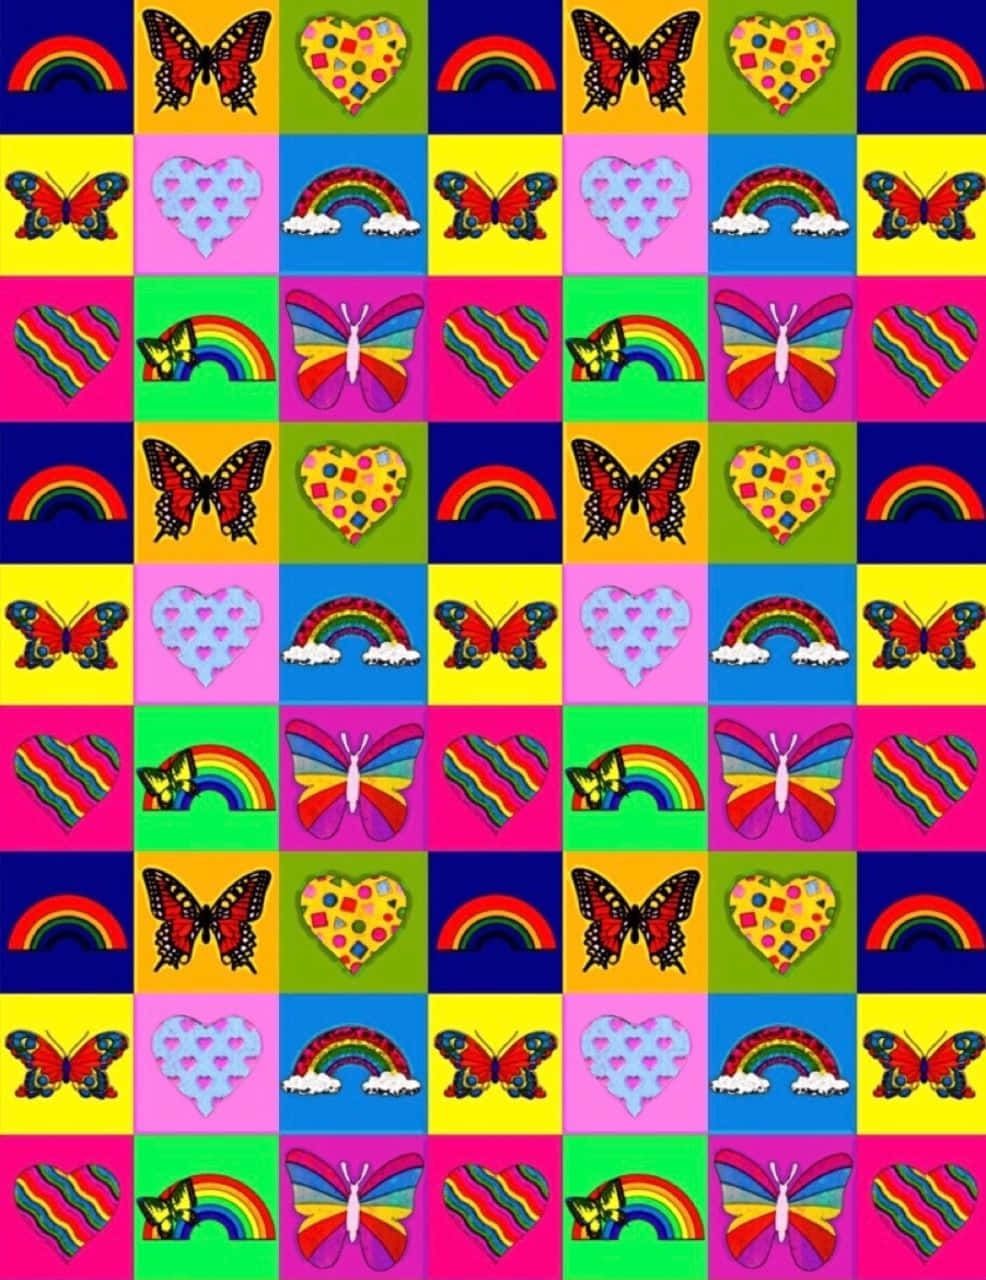 A pattern of butterflies, rainbows and other items - 2000s